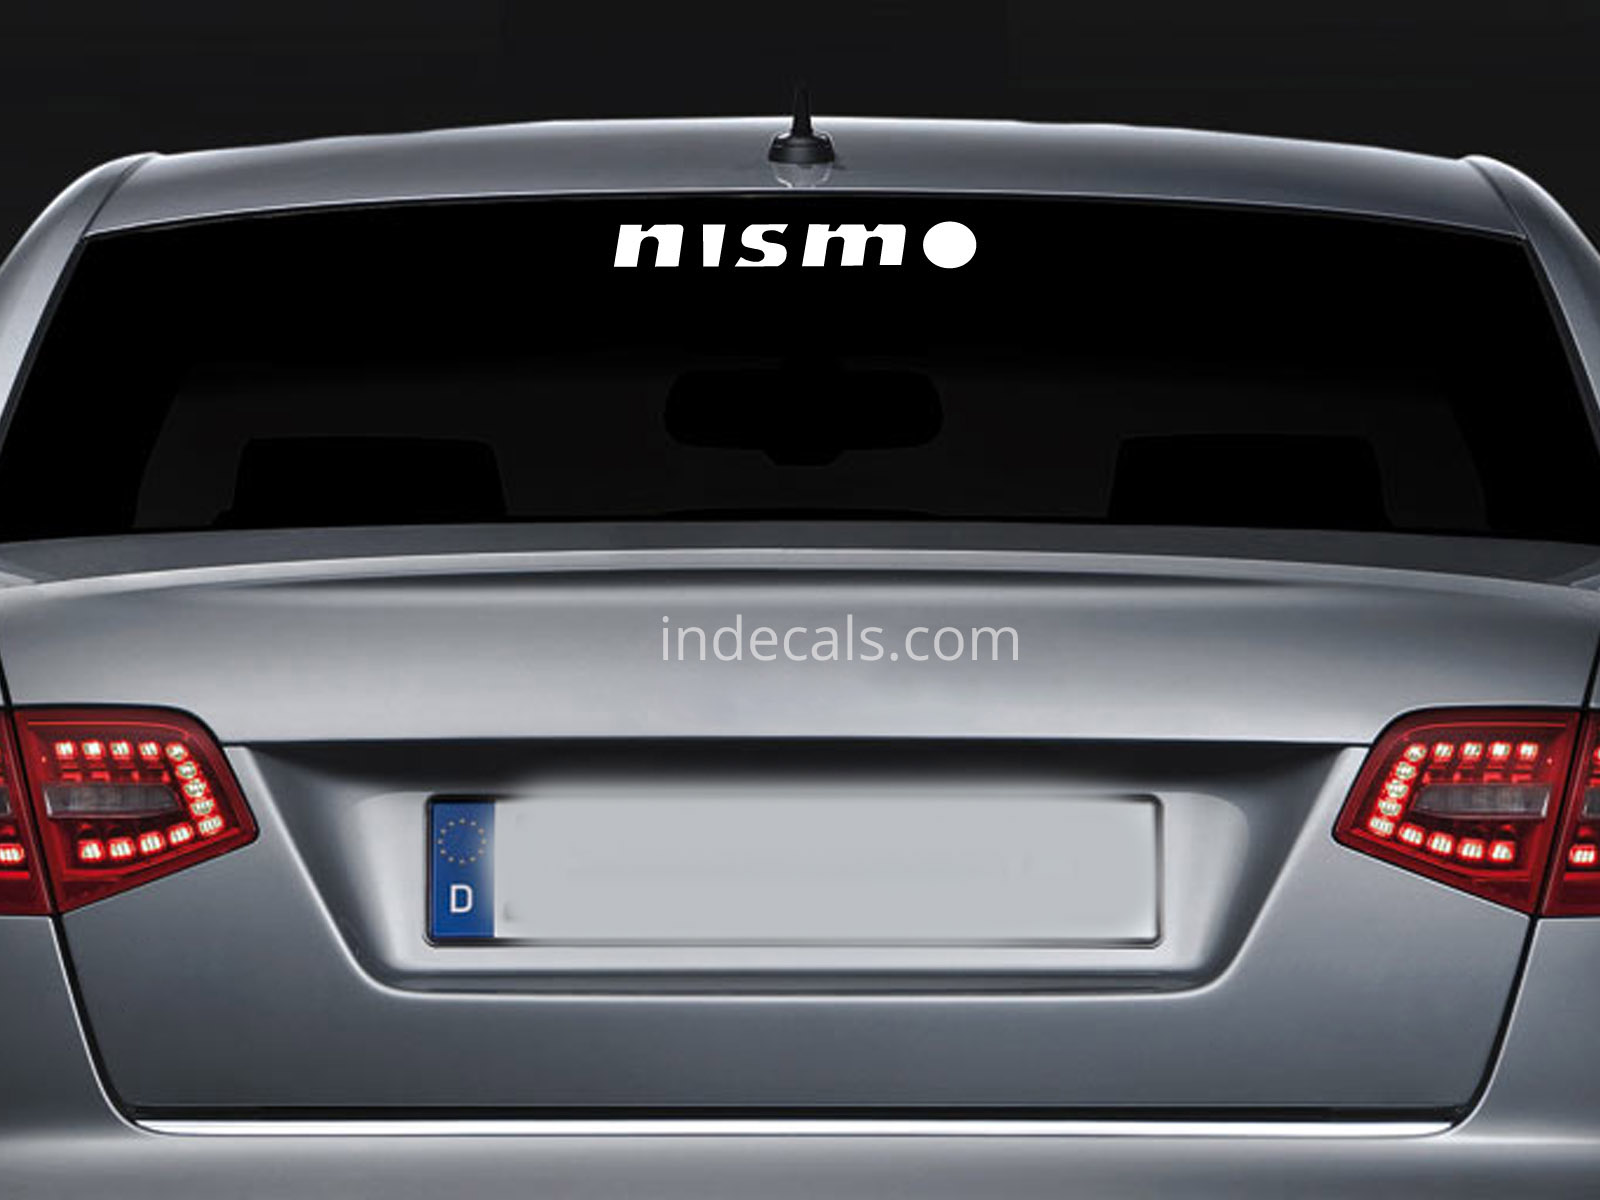 1 x Nismo Sticker for Windshield or Back Window - White